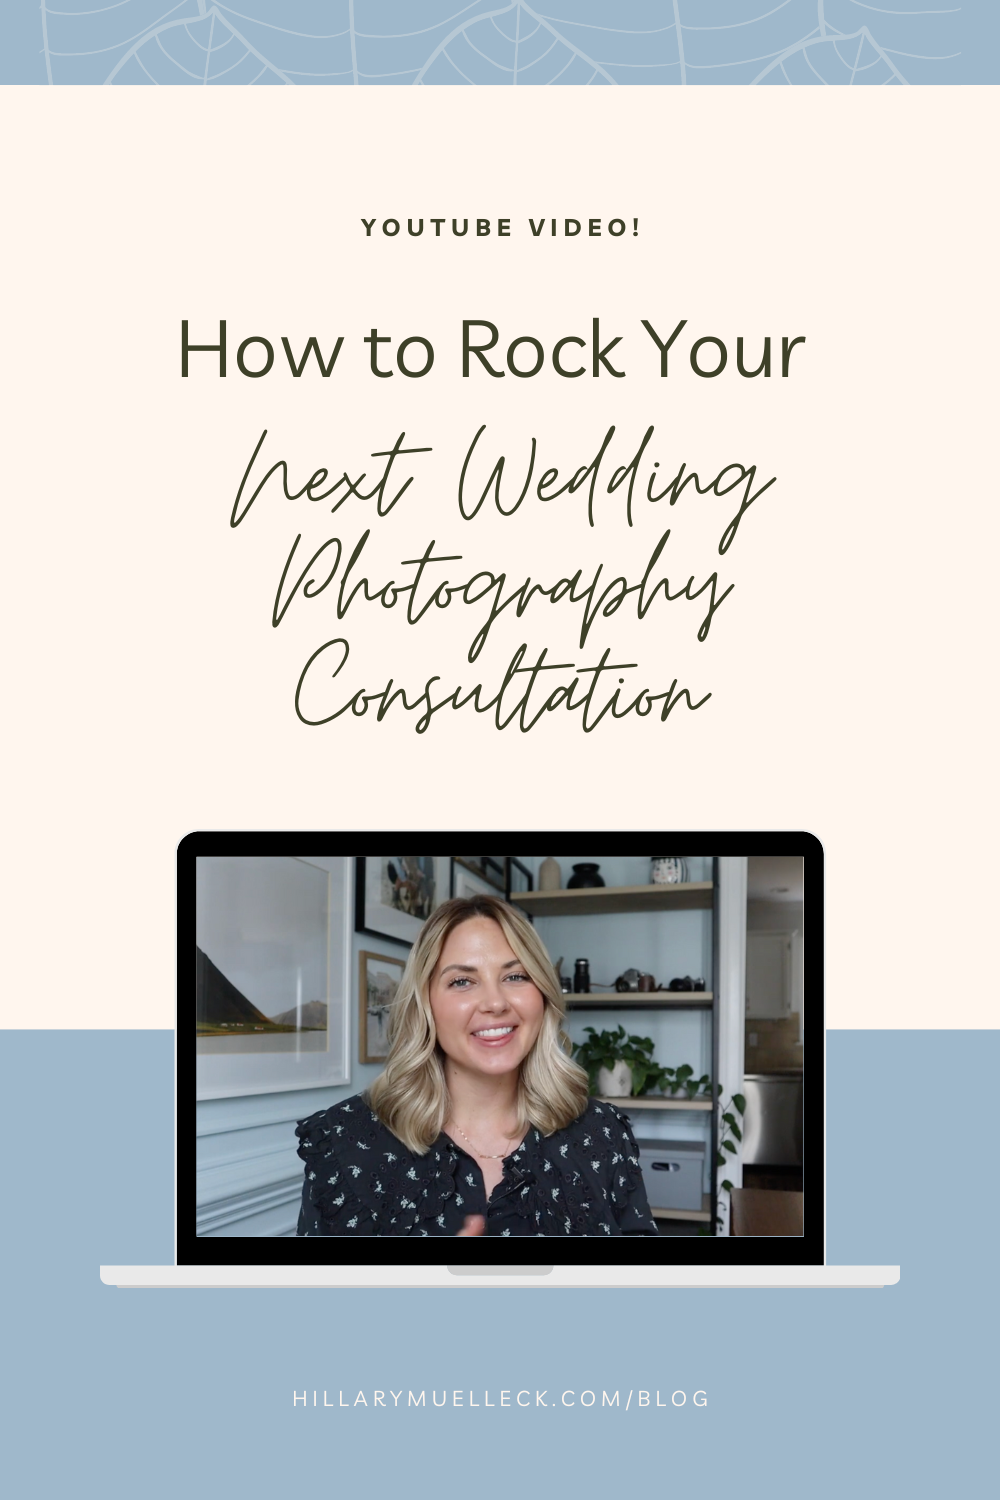 Rock your next wedding photography consultation: tips from wedding photographer Hillary Muelleck for making connections with your couples